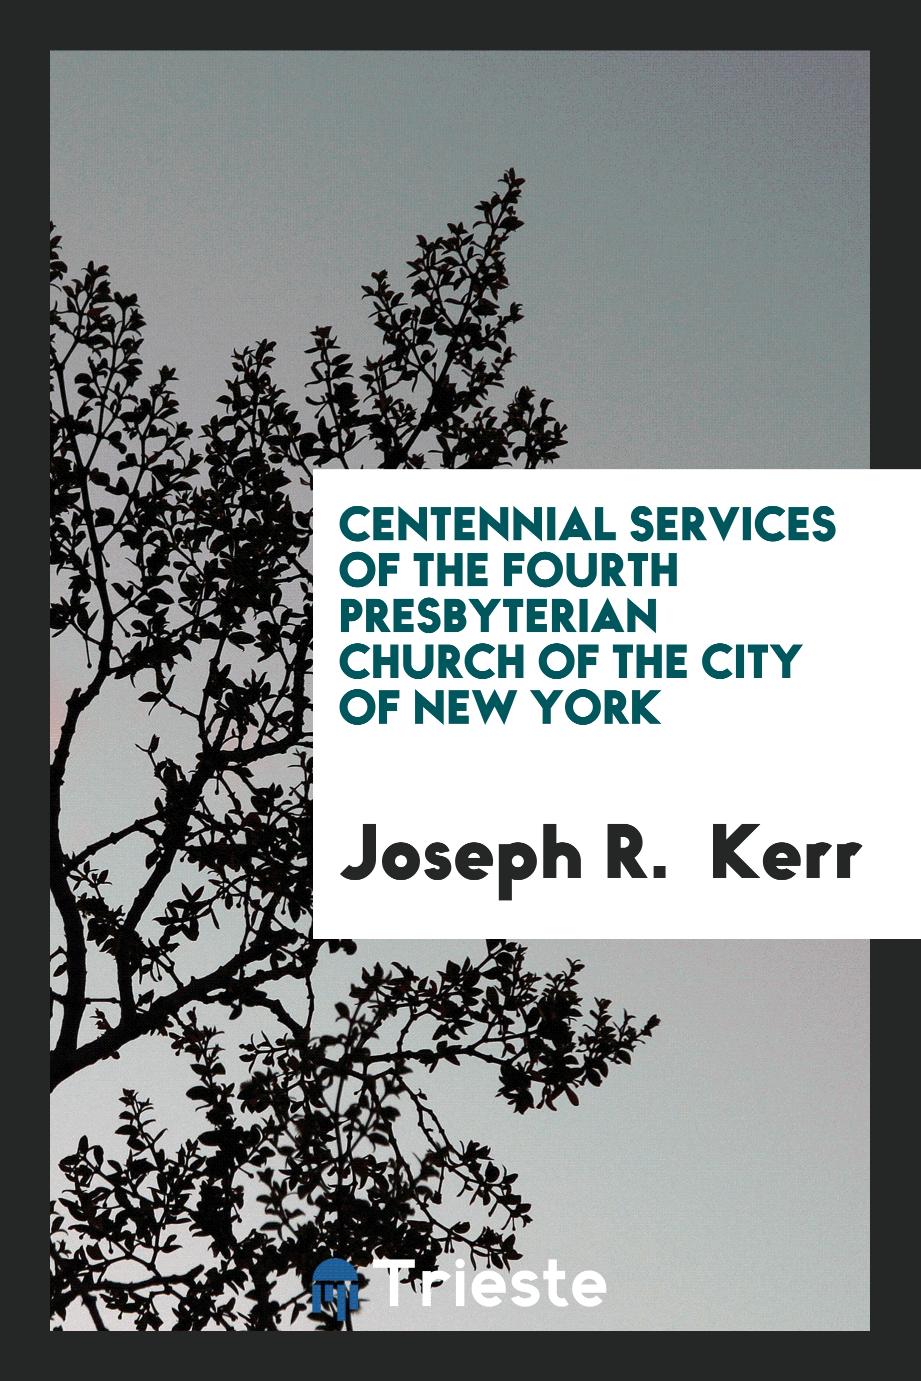 Centennial services of the Fourth Presbyterian Church of the city of New York